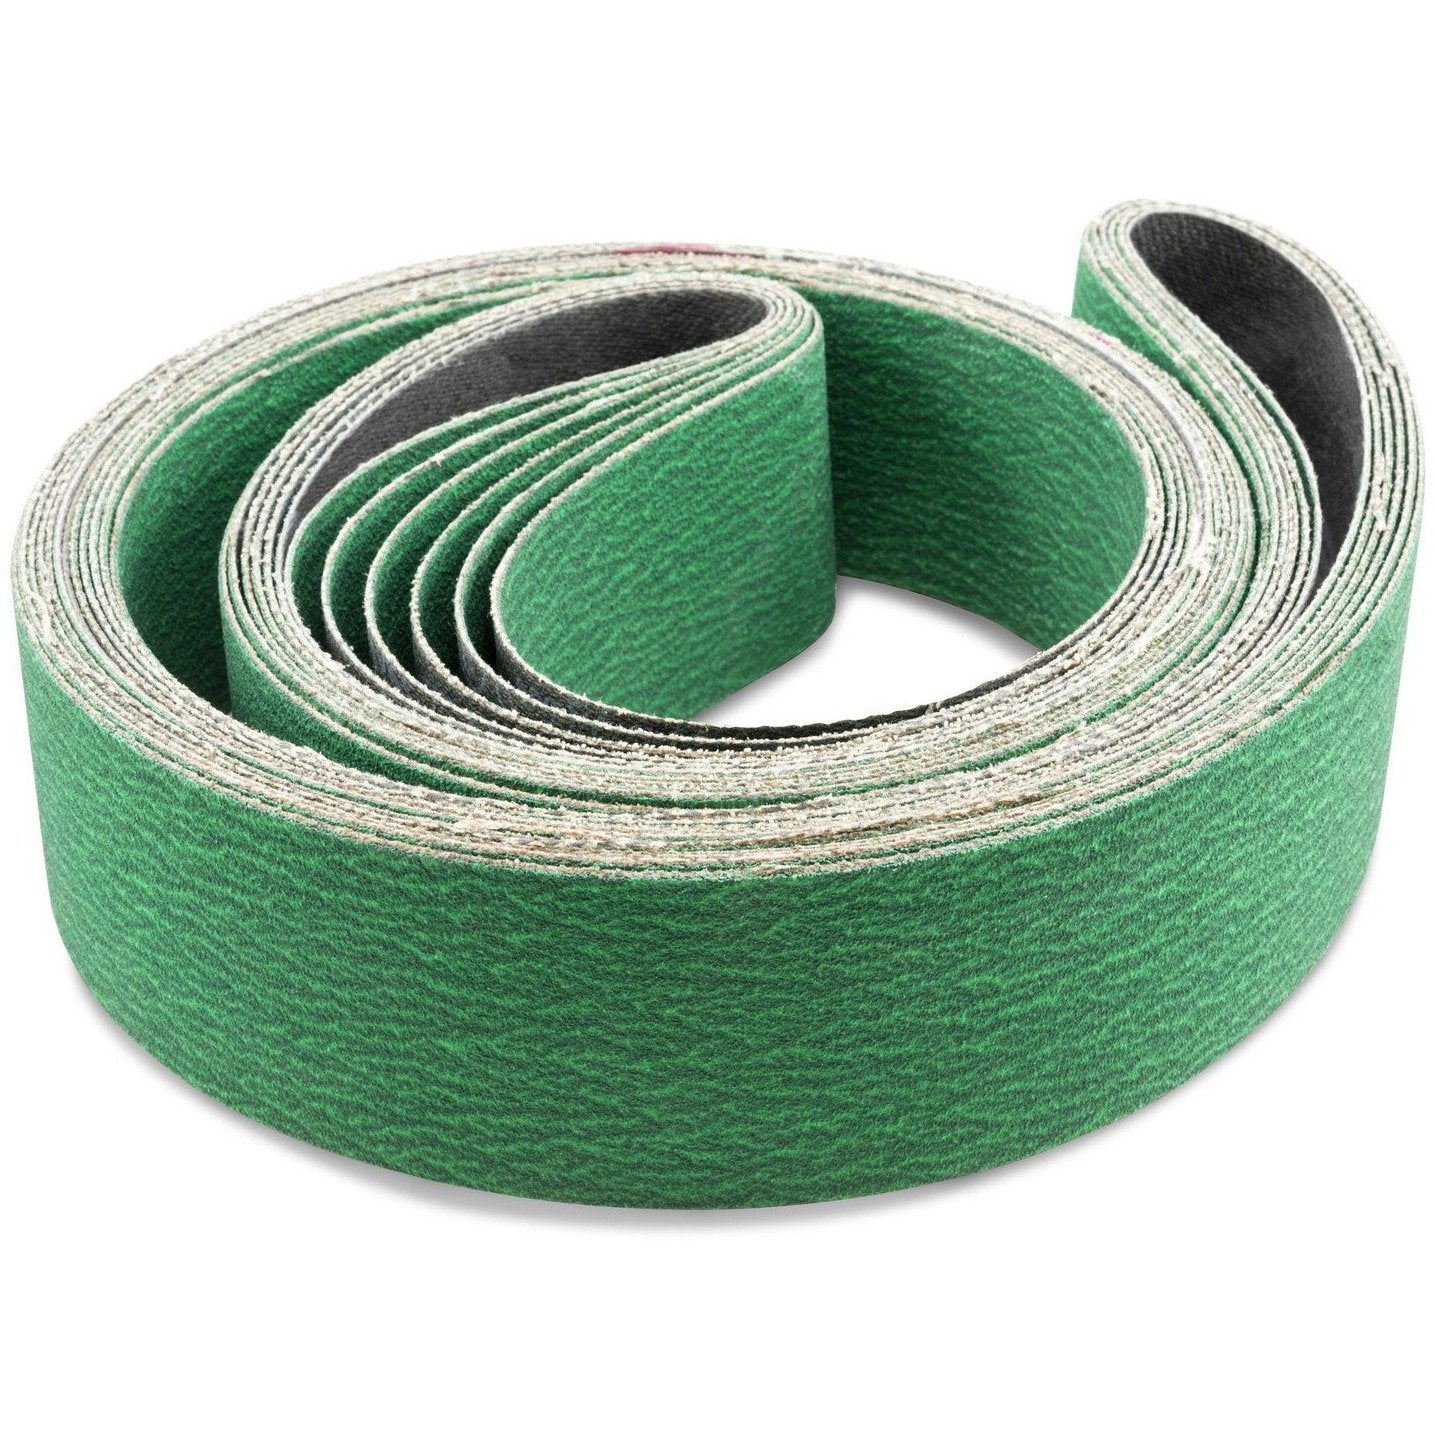 How To Clean Sanding Belts  Extending The Life Of Your Belts